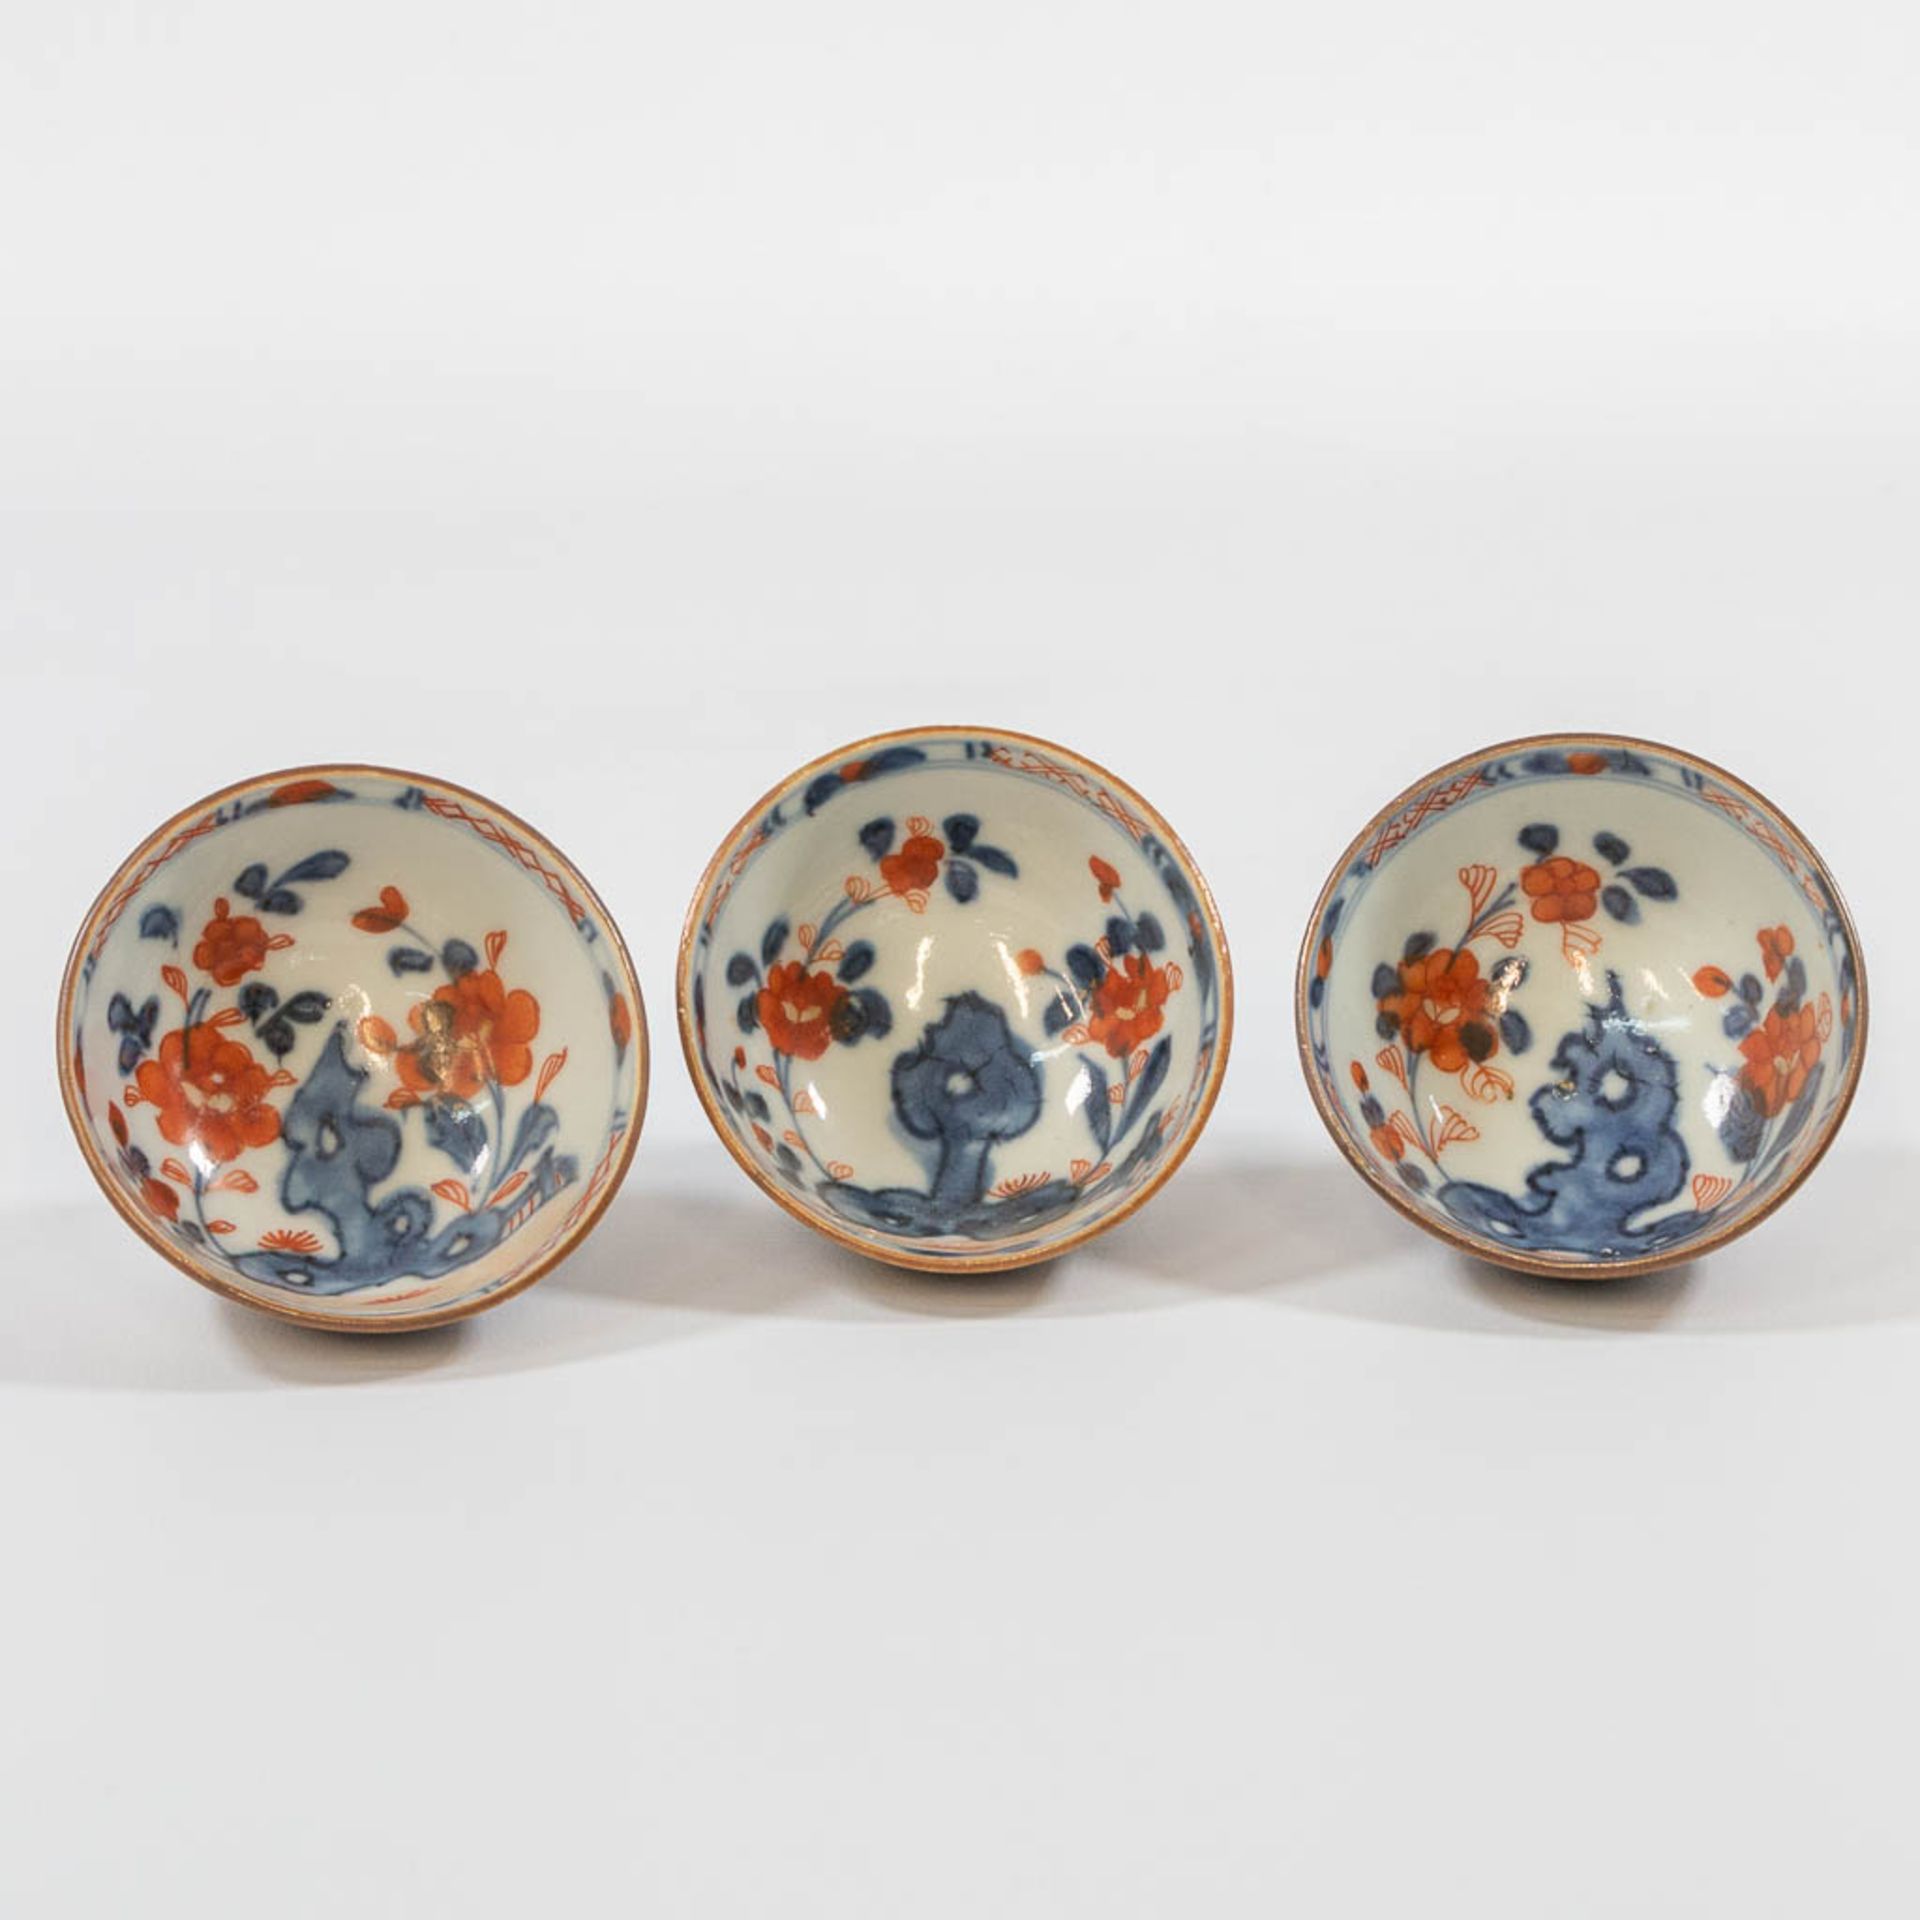 A collection of 12 Capucine Chinese porcelain items, consisting of 5 plates and 7 cups. - Image 23 of 26